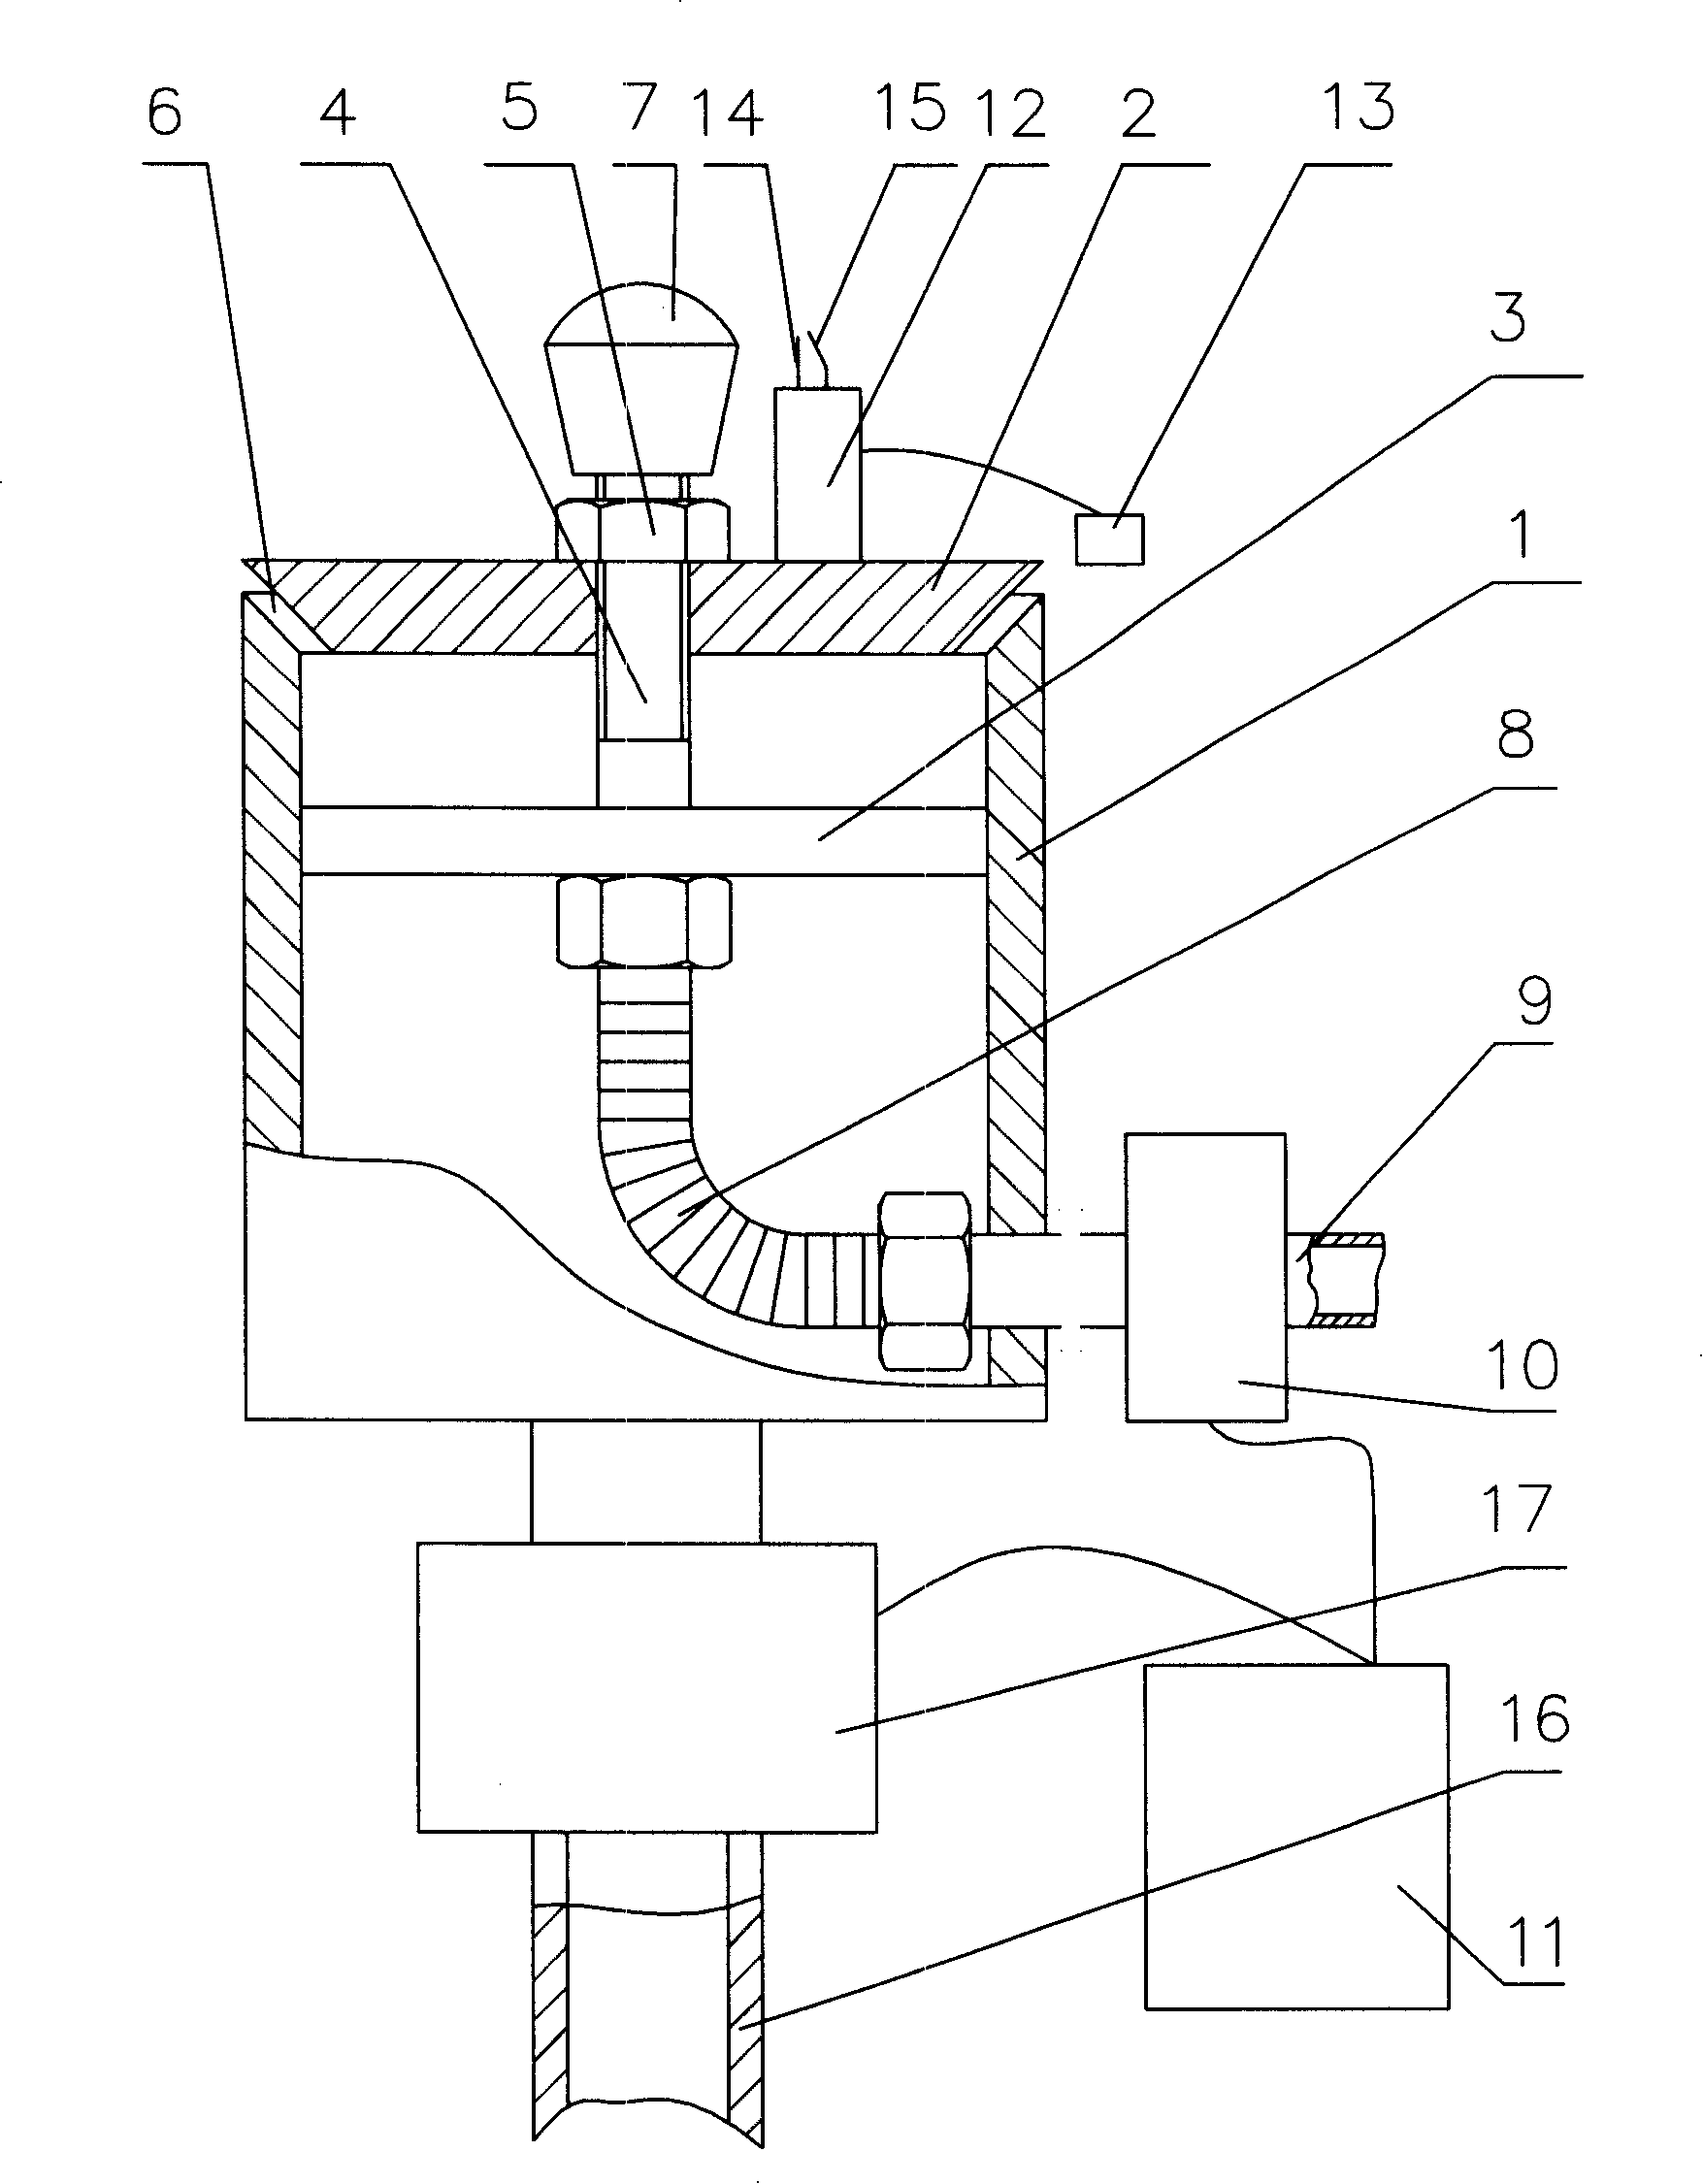 Fountain nozzle with cap for synchronously spraying water and fire